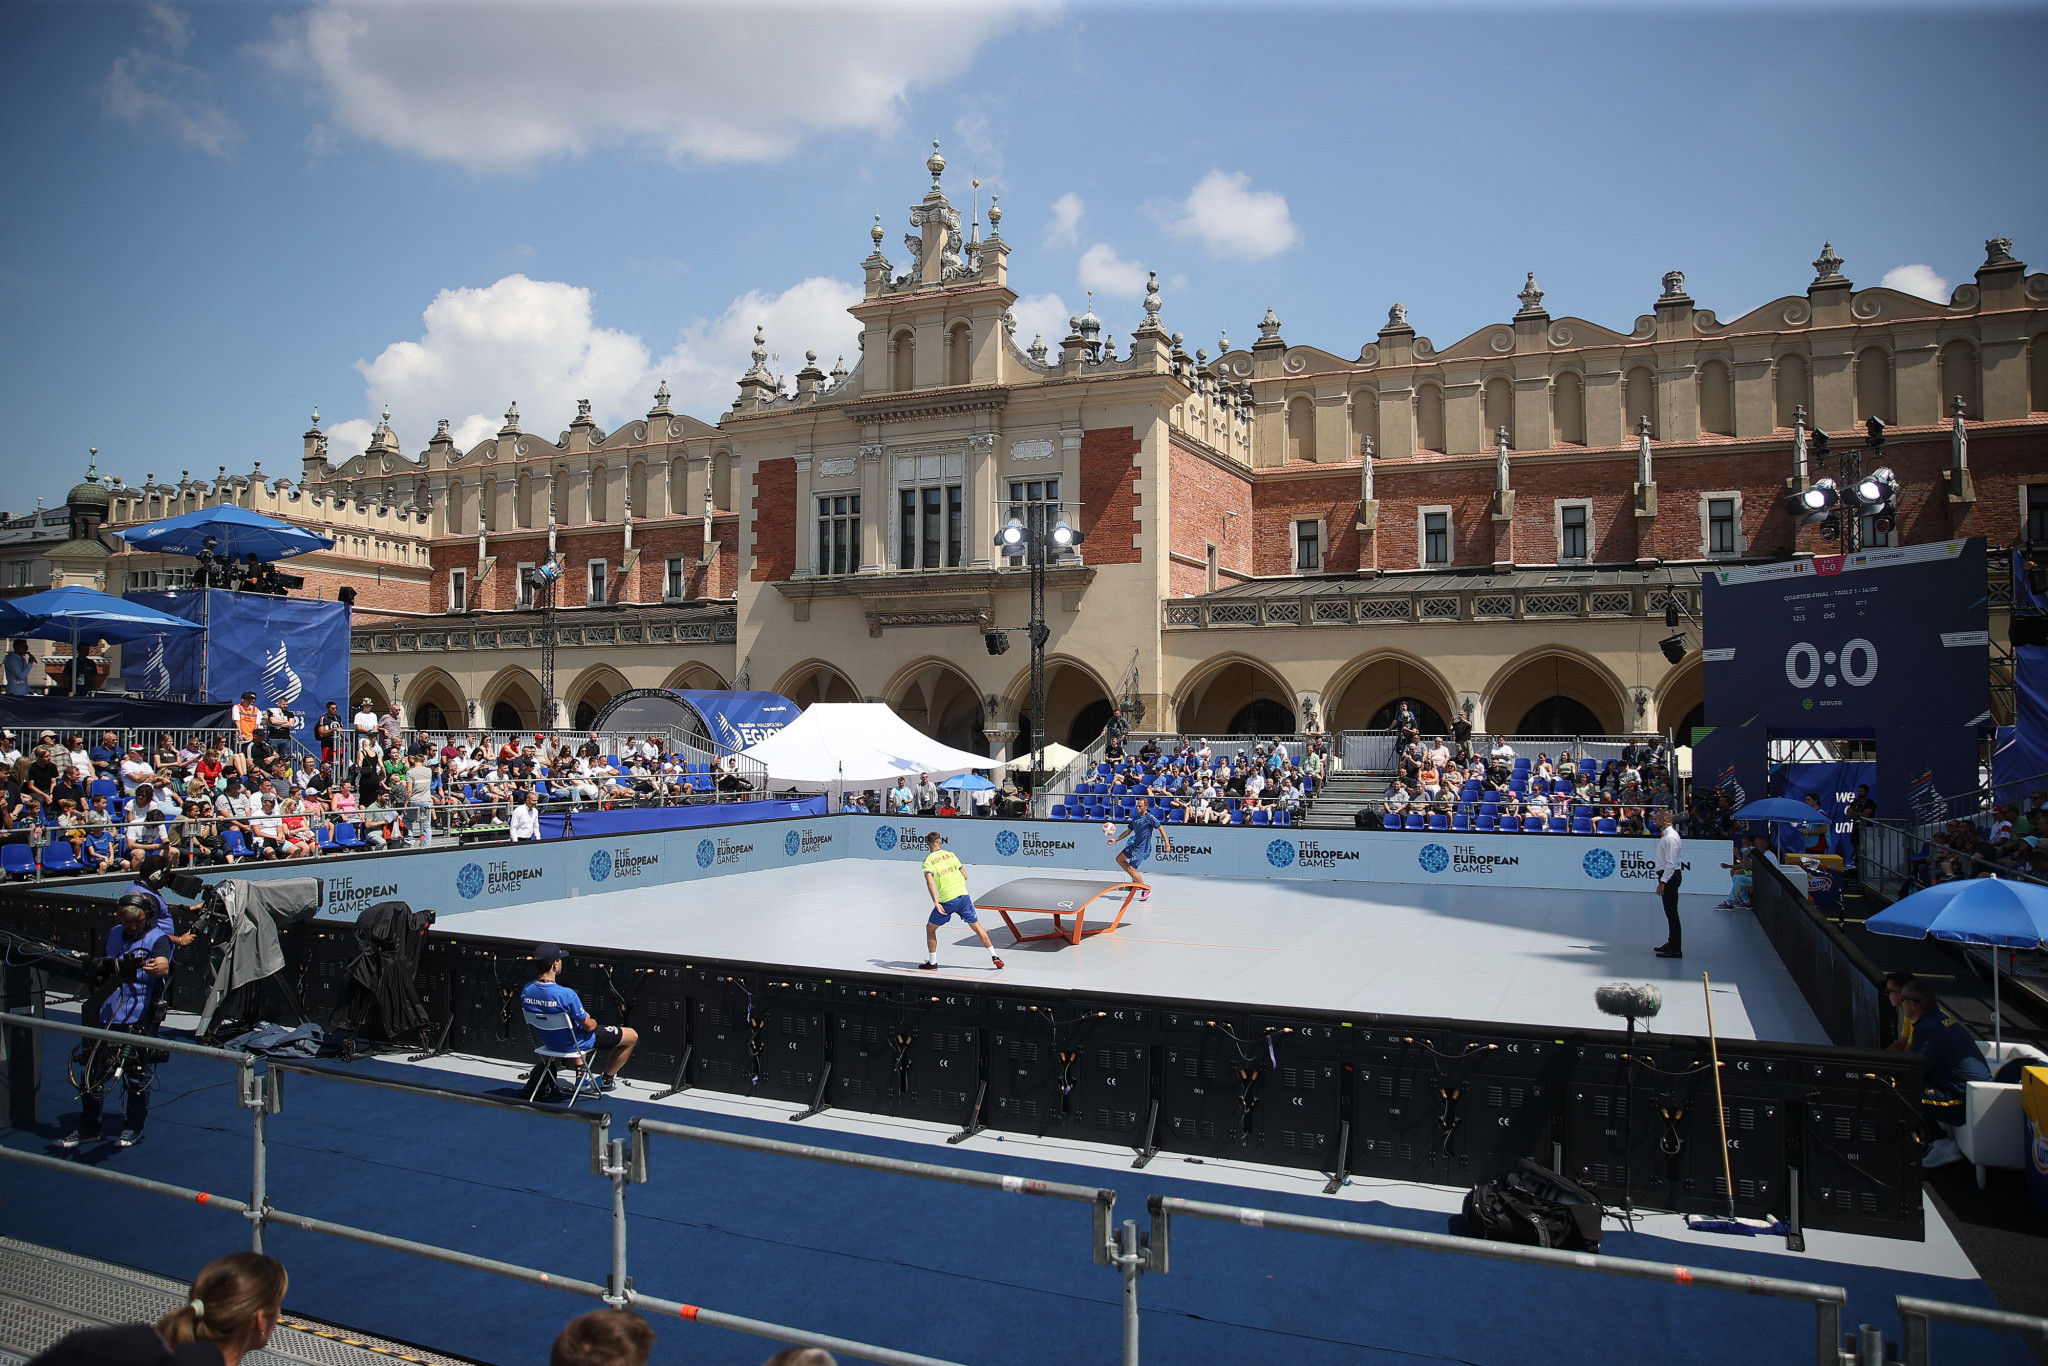 Teqball was the second sport at the European Games held on the Main Square in Kraków, following on from padel on Sunday ©Kraków-Małopolska 2023